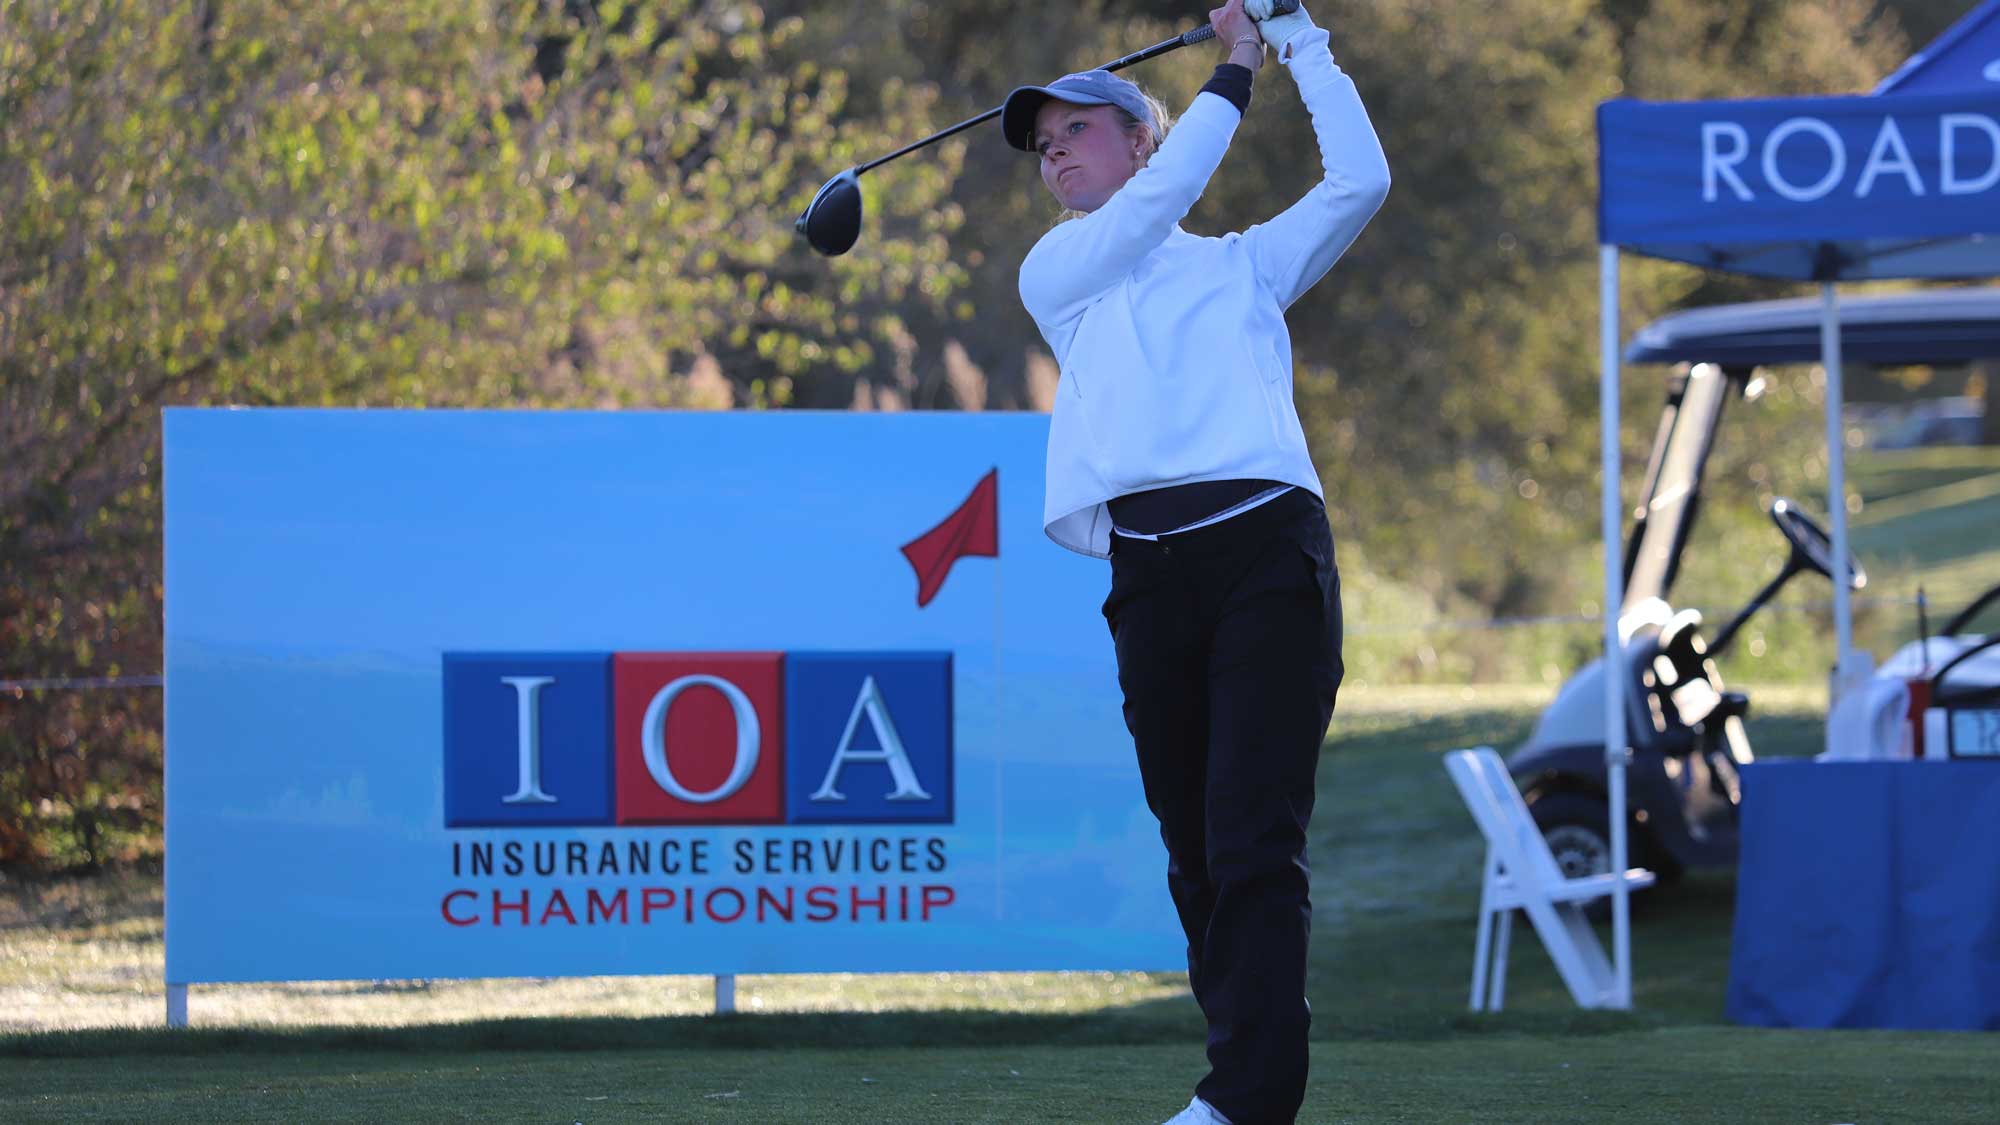 Sophie Hausmann during round 2 of the 2021 IOA Championship